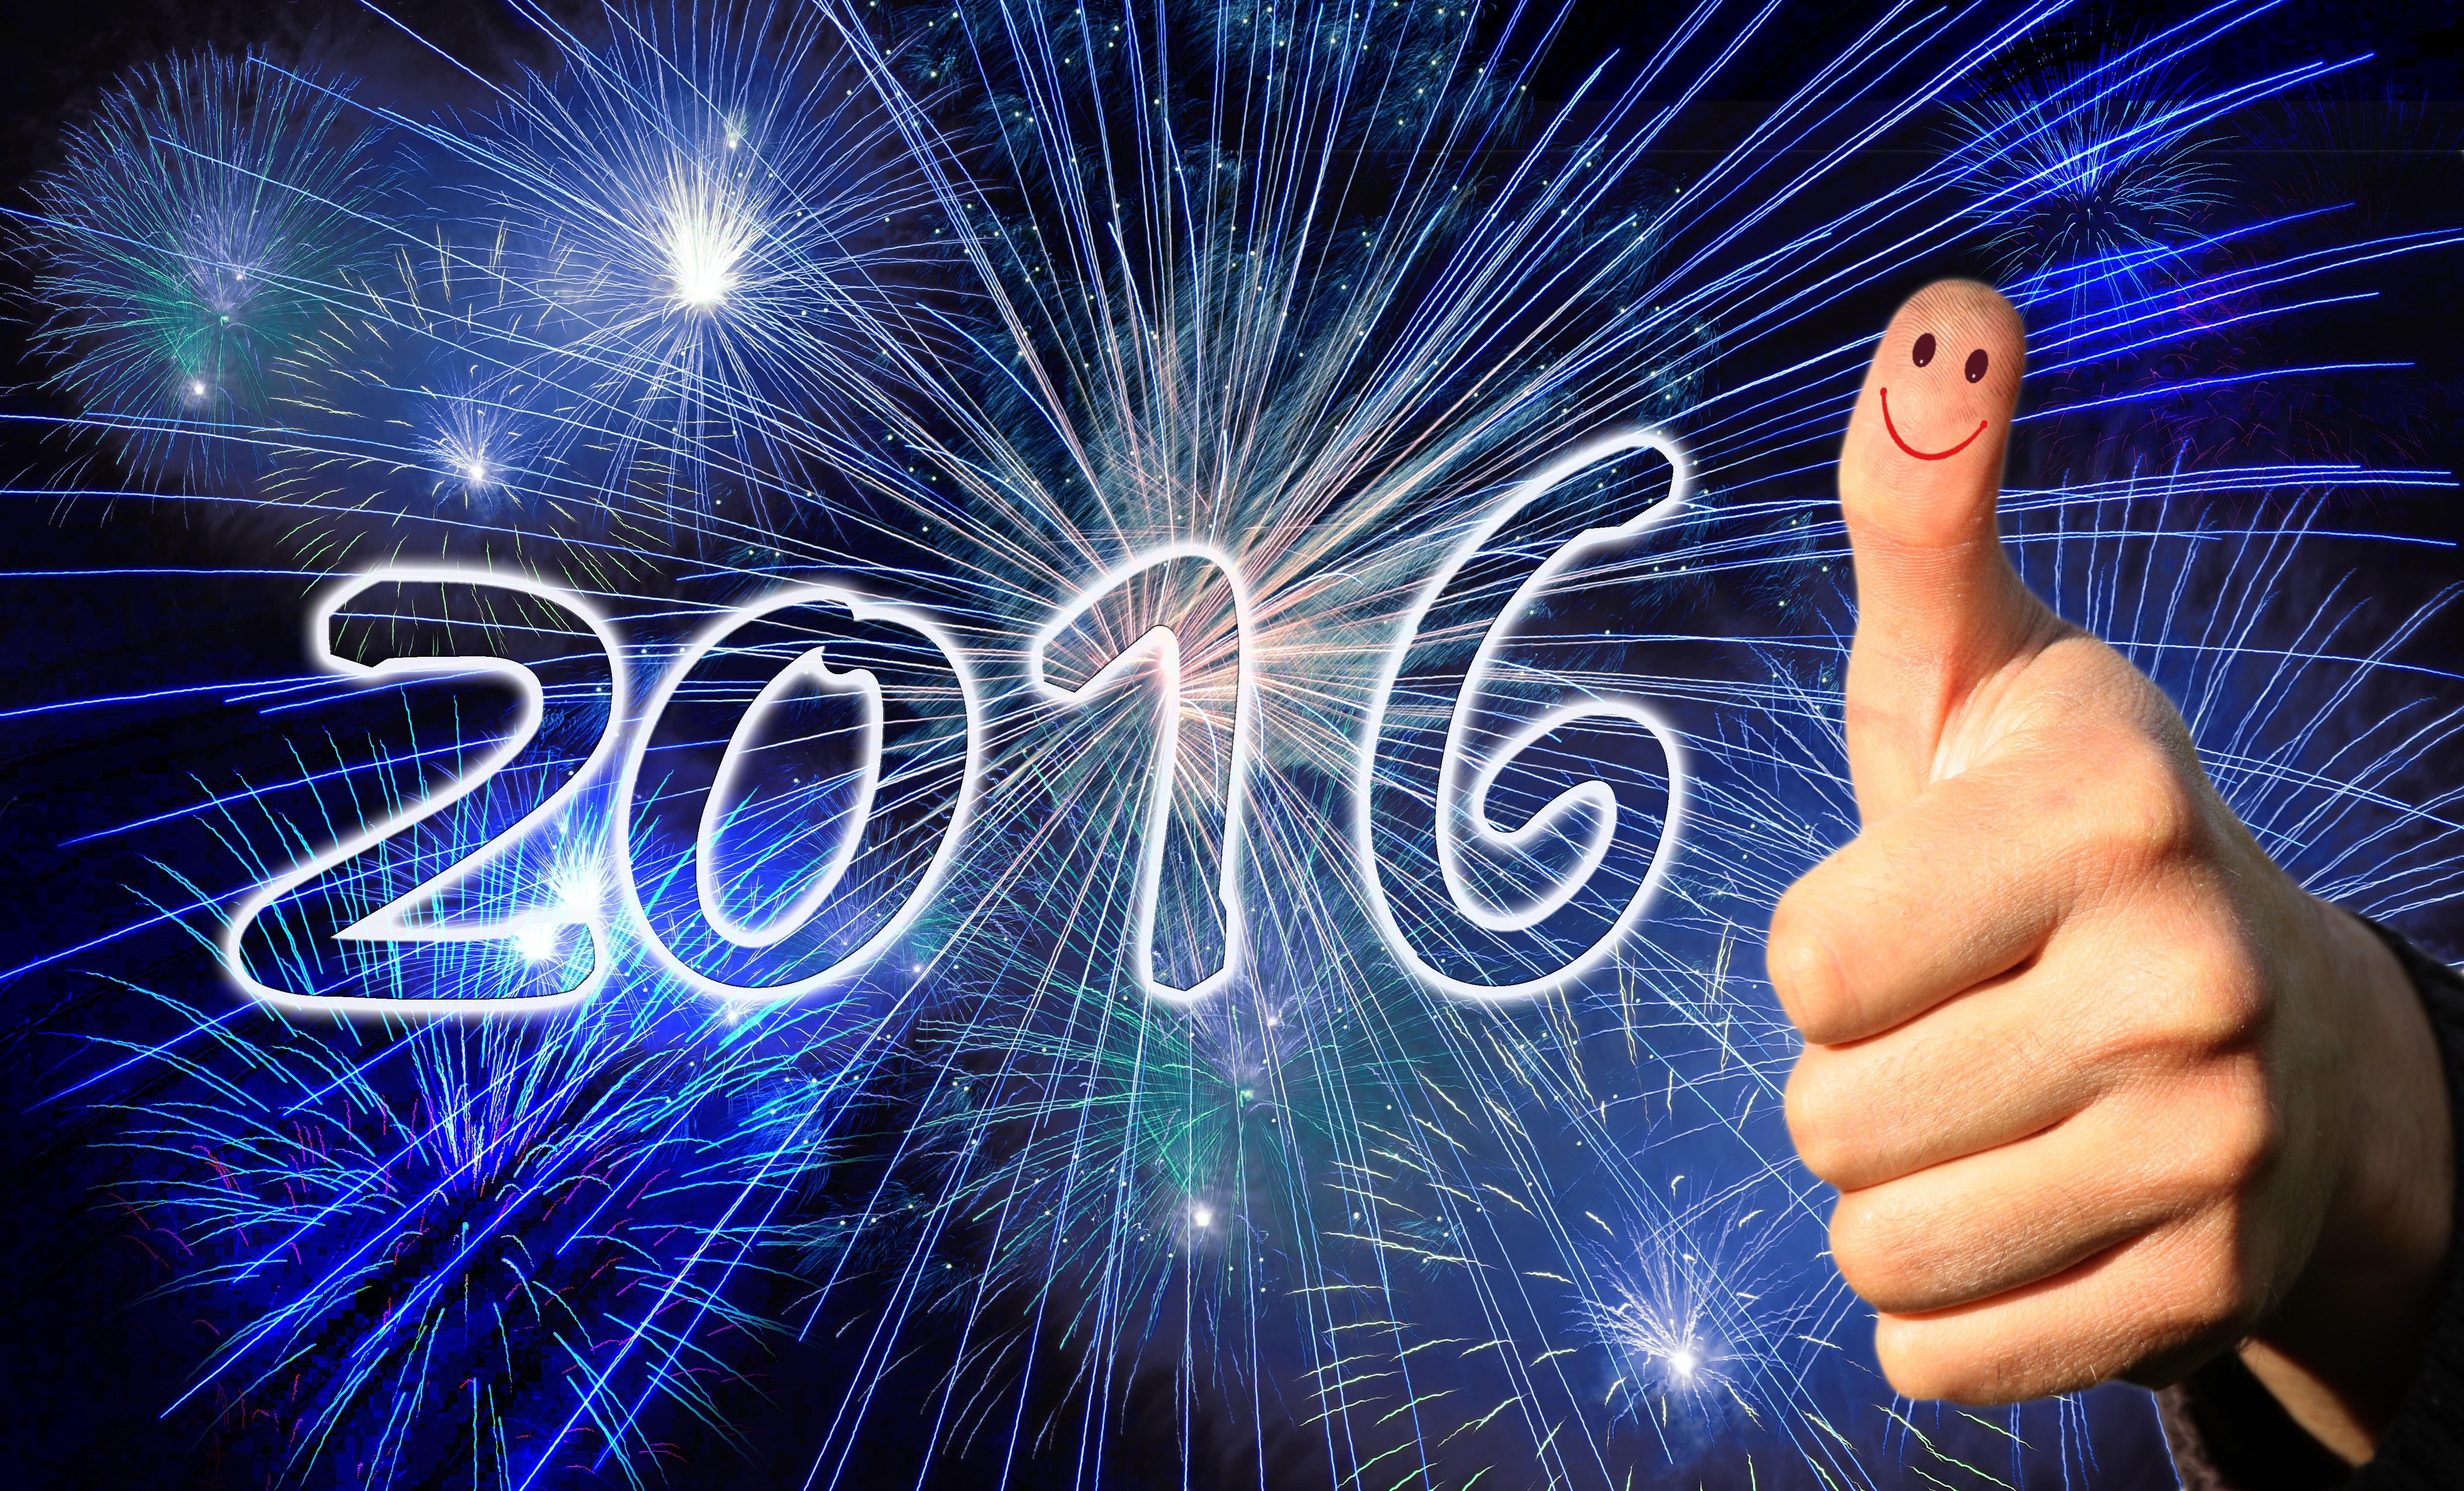 holiday, new year 2016, fireworks, new year